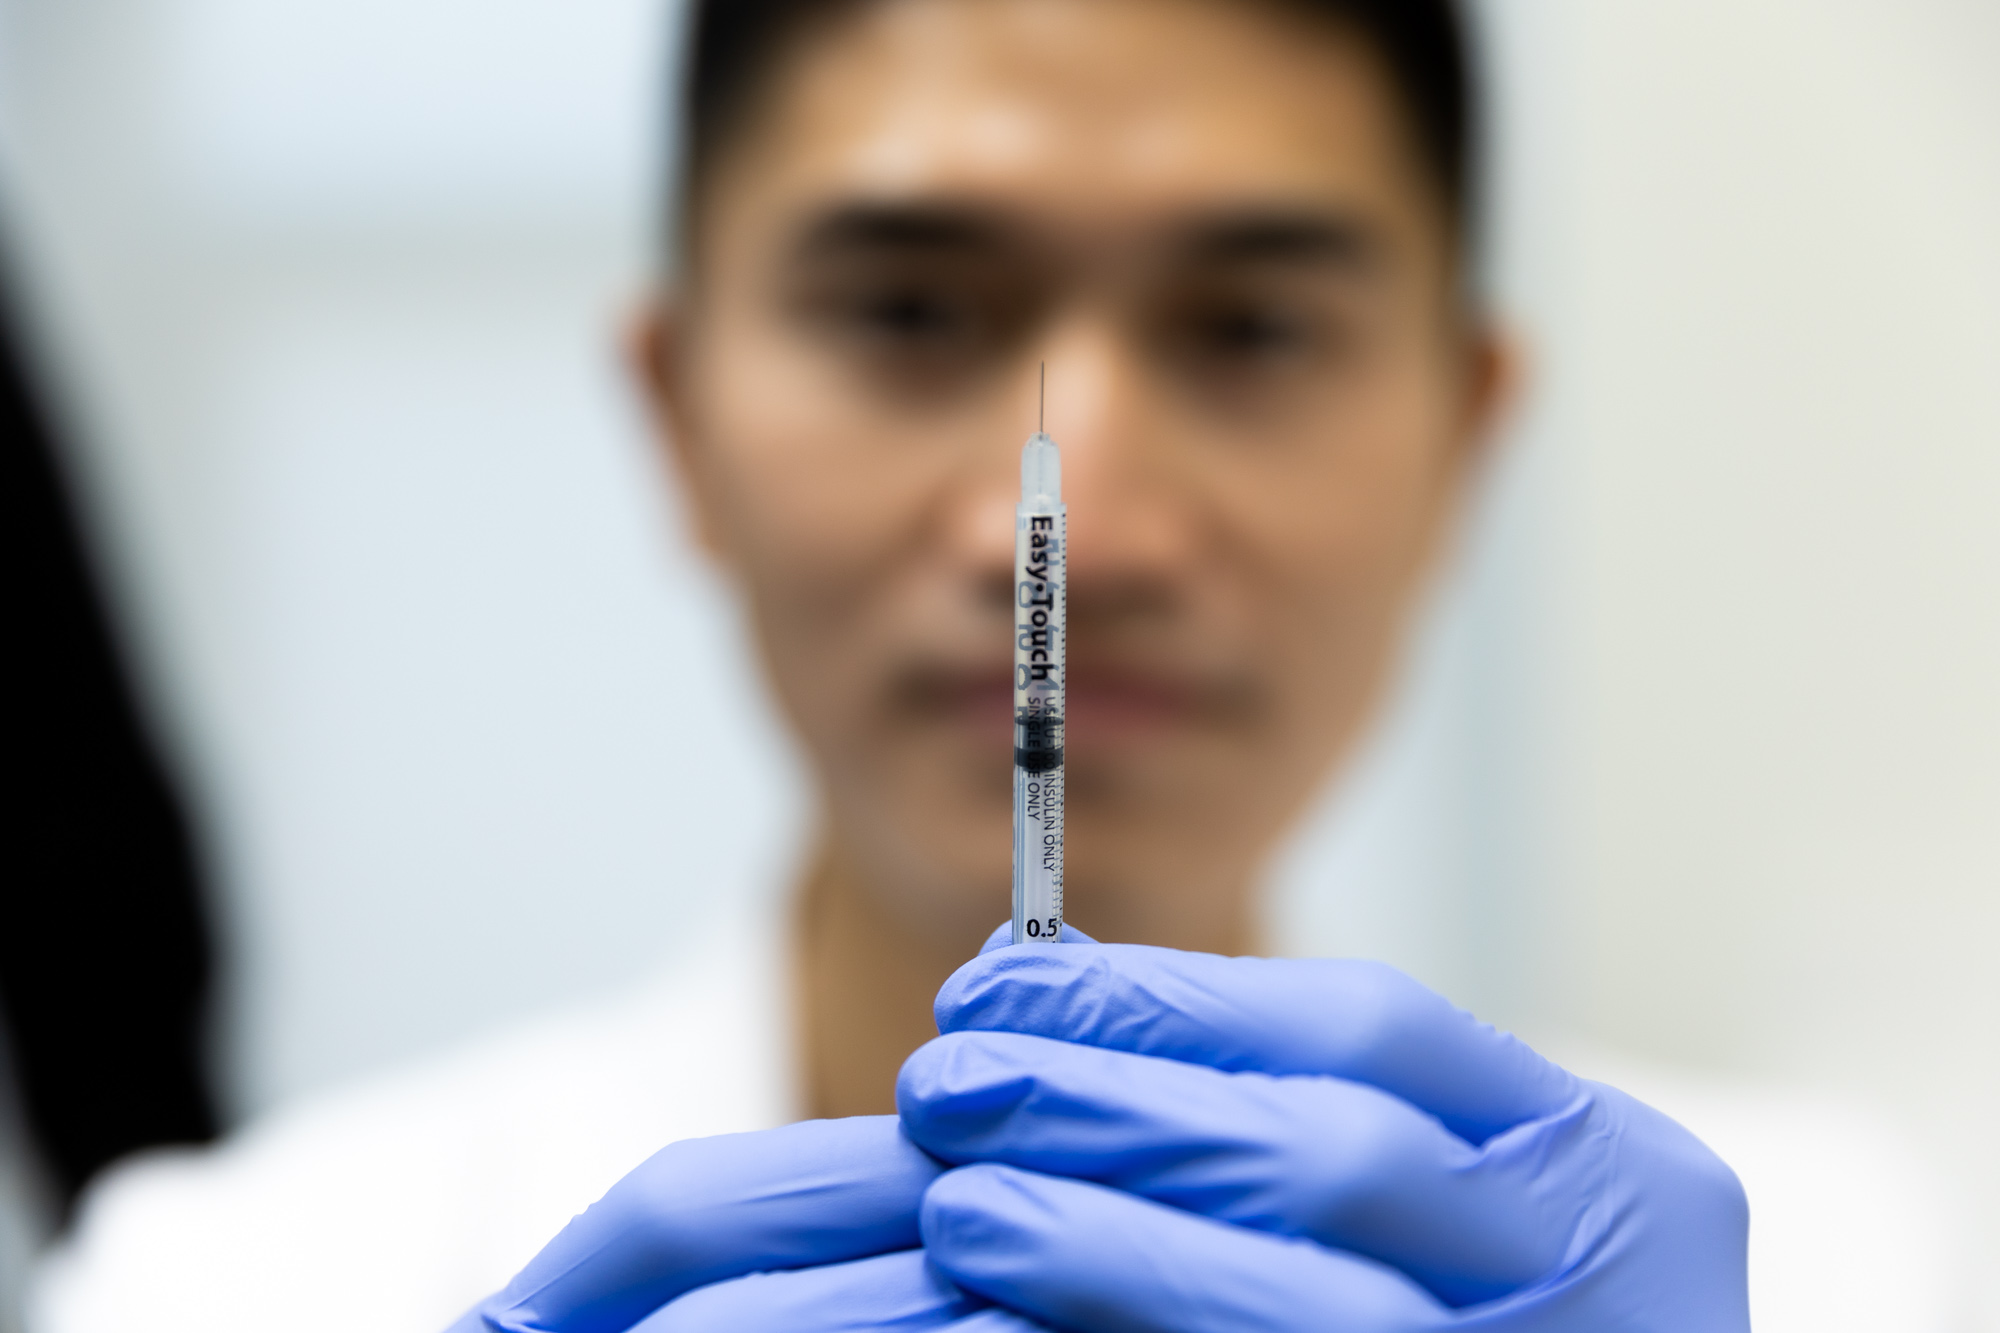 A doctor holds up a syringe with a needle. Syringe reads Easy Touch. The doctor's face is out of focus in the background; he is measuring the contents of the syringe.